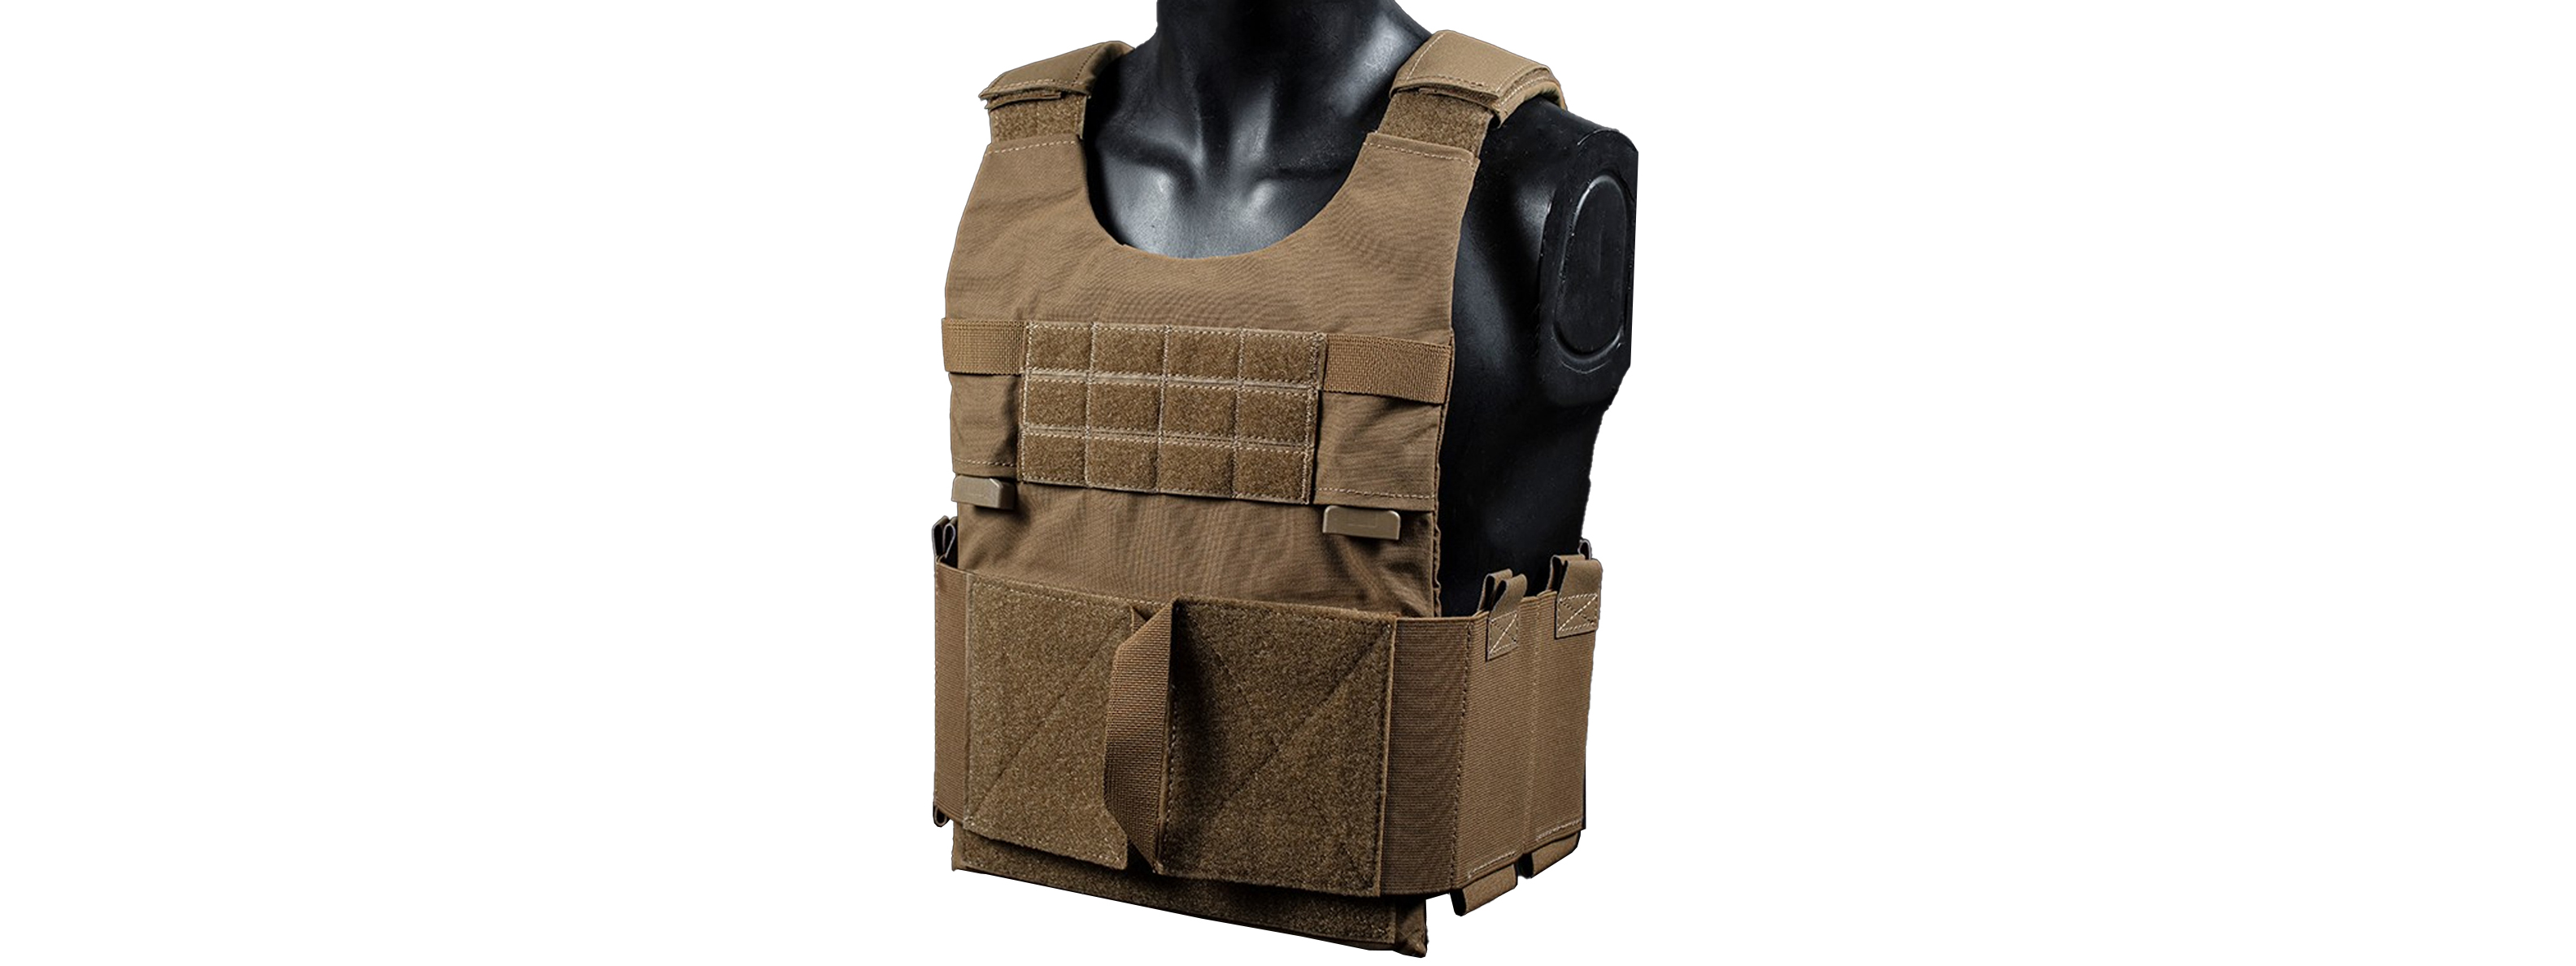 Airsoft Tactical Vest Carrier - (Tan)